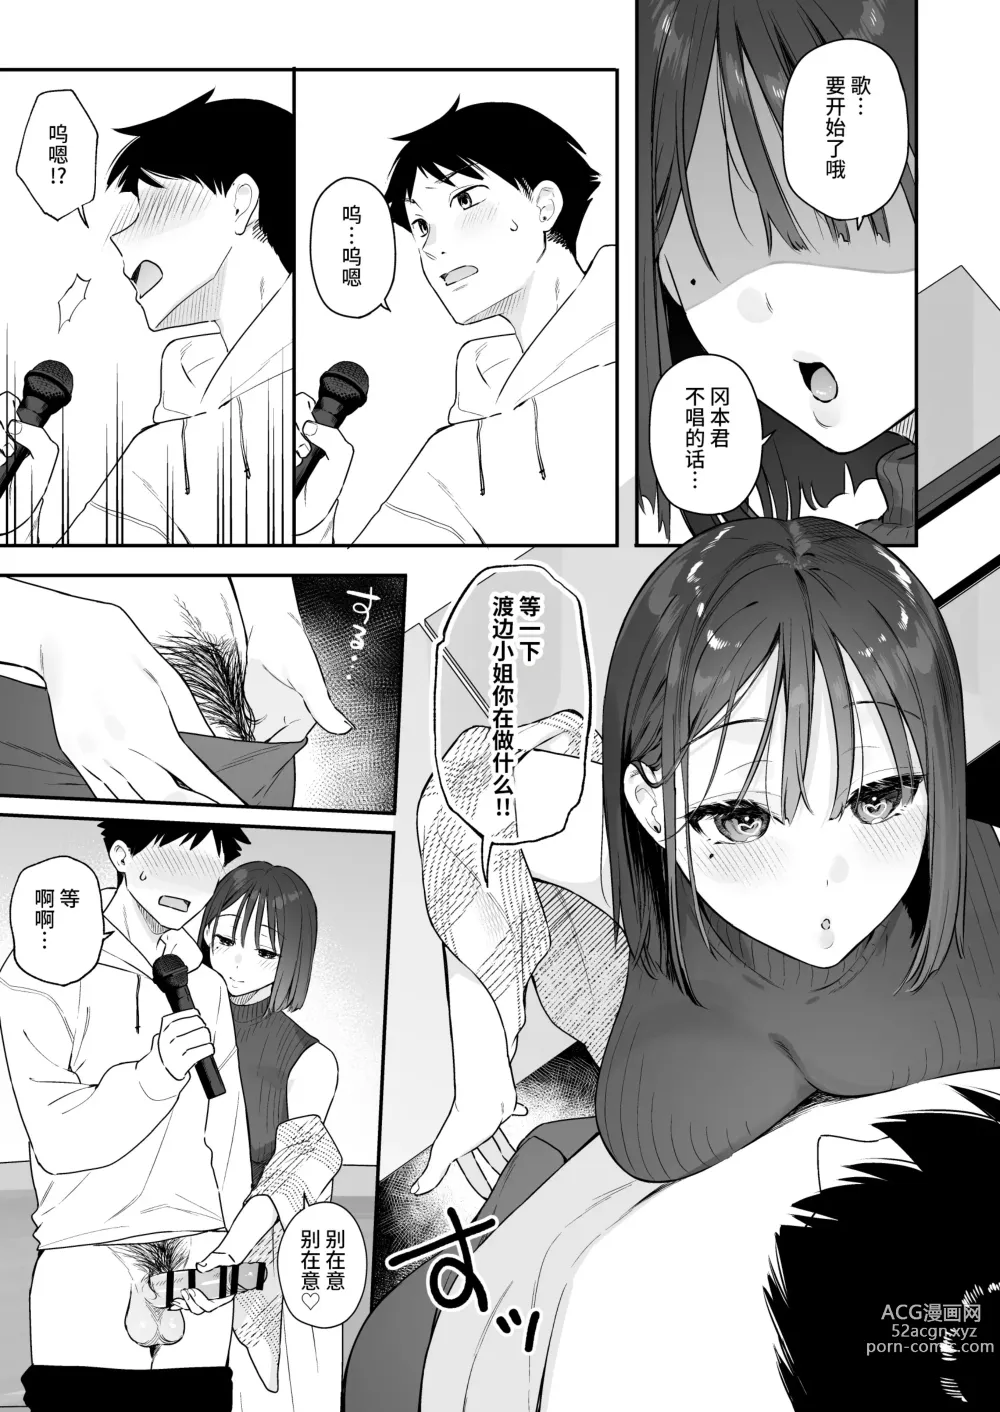 Page 40 of doujinshi 她的发情开关 2